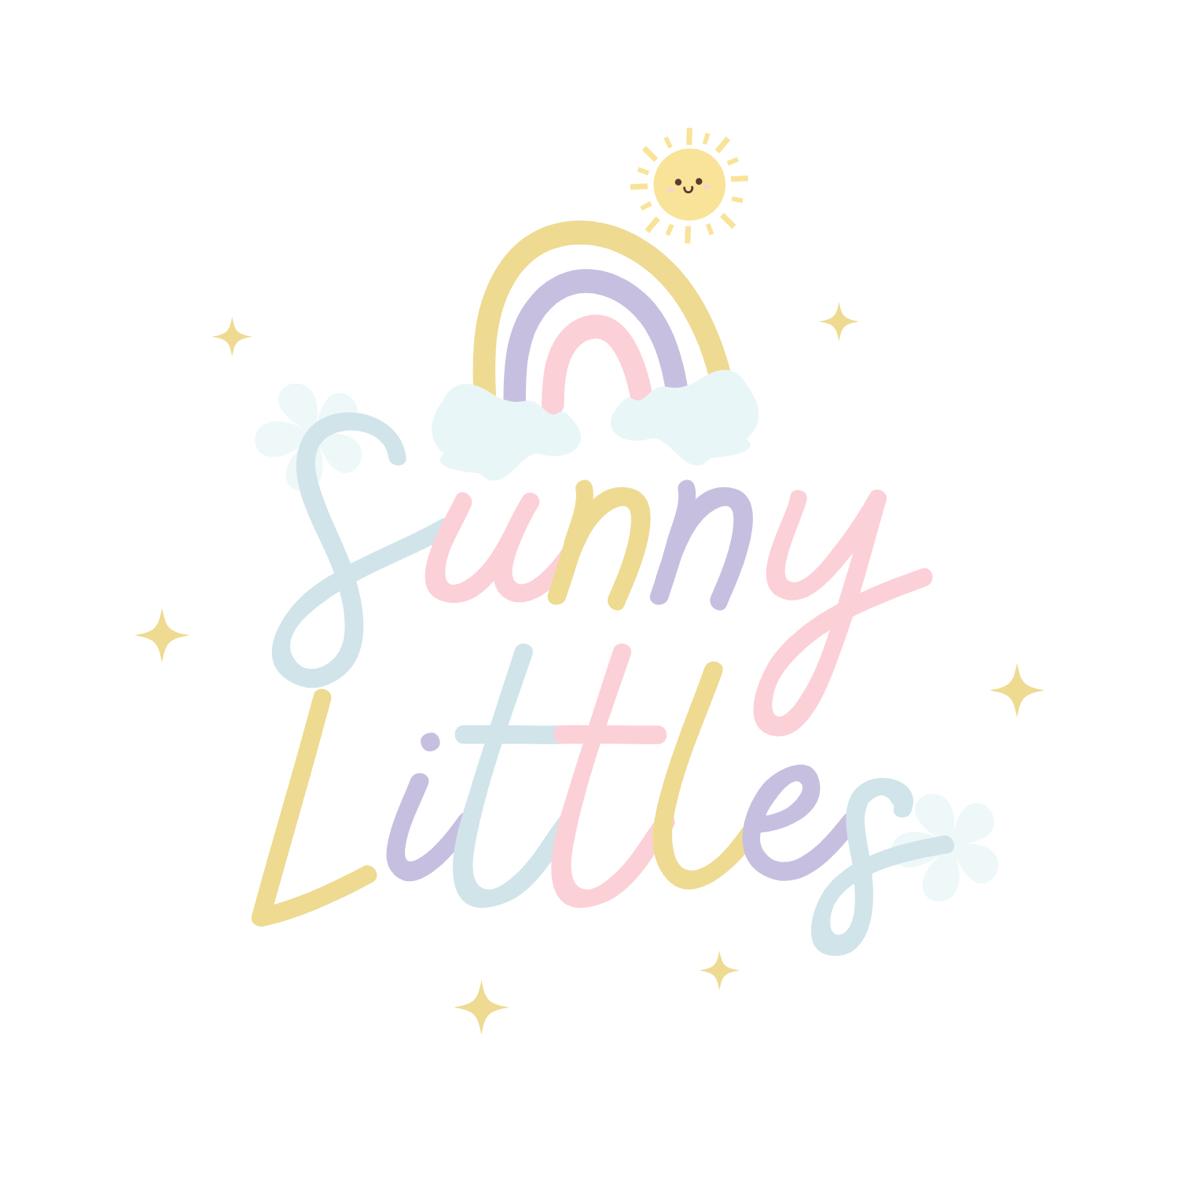 Sunny Littles's images